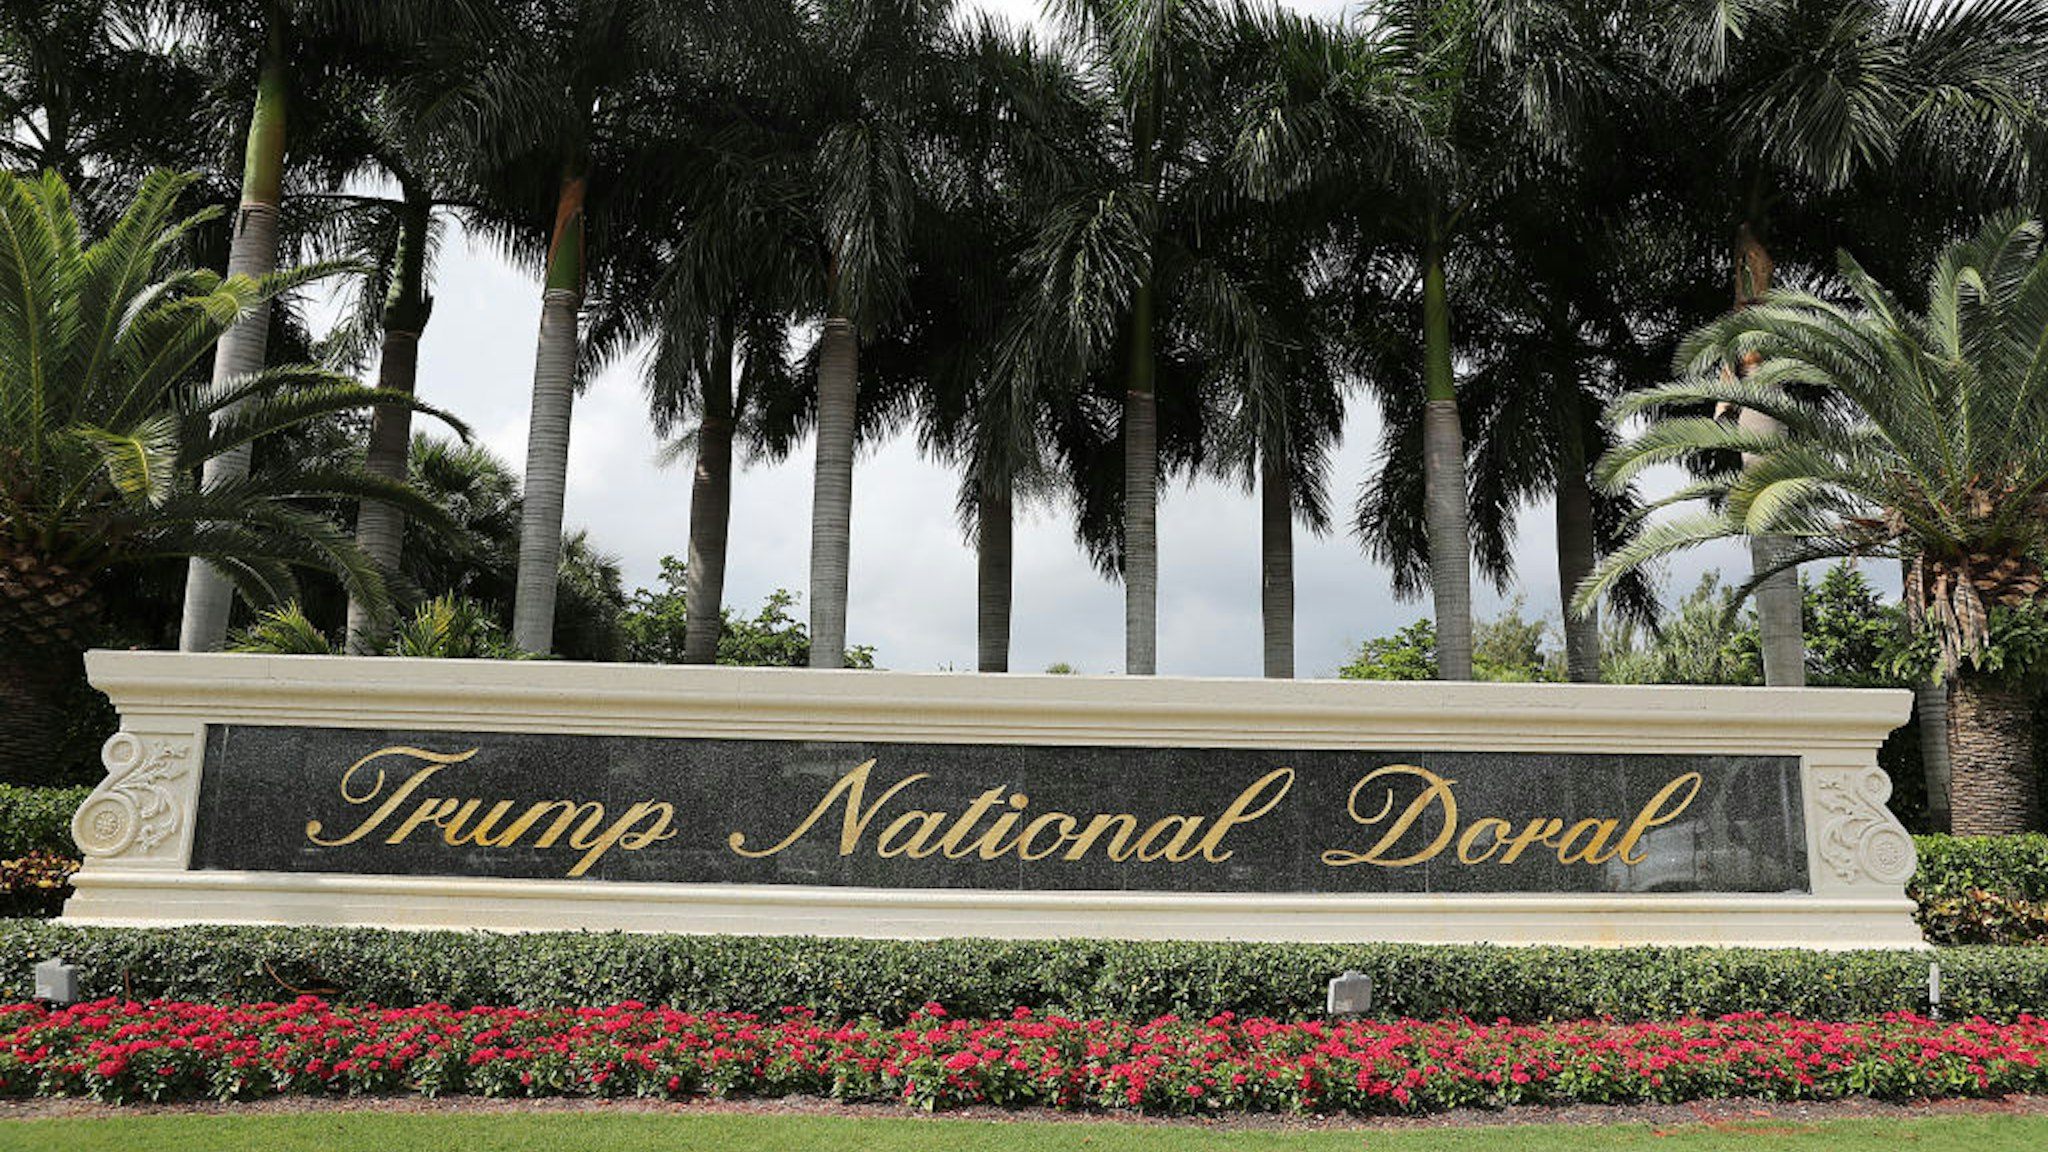 A sign is seen near the front entrance to the Trump National Doral golf resort owned by U.S. President Donald Trump's company on October 17, 2019 in Doral, Florida. White House chief of staff Mick Mulvaney announced today that the resort will host the Group of Seven meeting, between the United States, UK, France, Germany, Canada, Japan, Italy, and the EU, and will take place in June of 2020. (Photo by Joe Raedle/Getty Images)